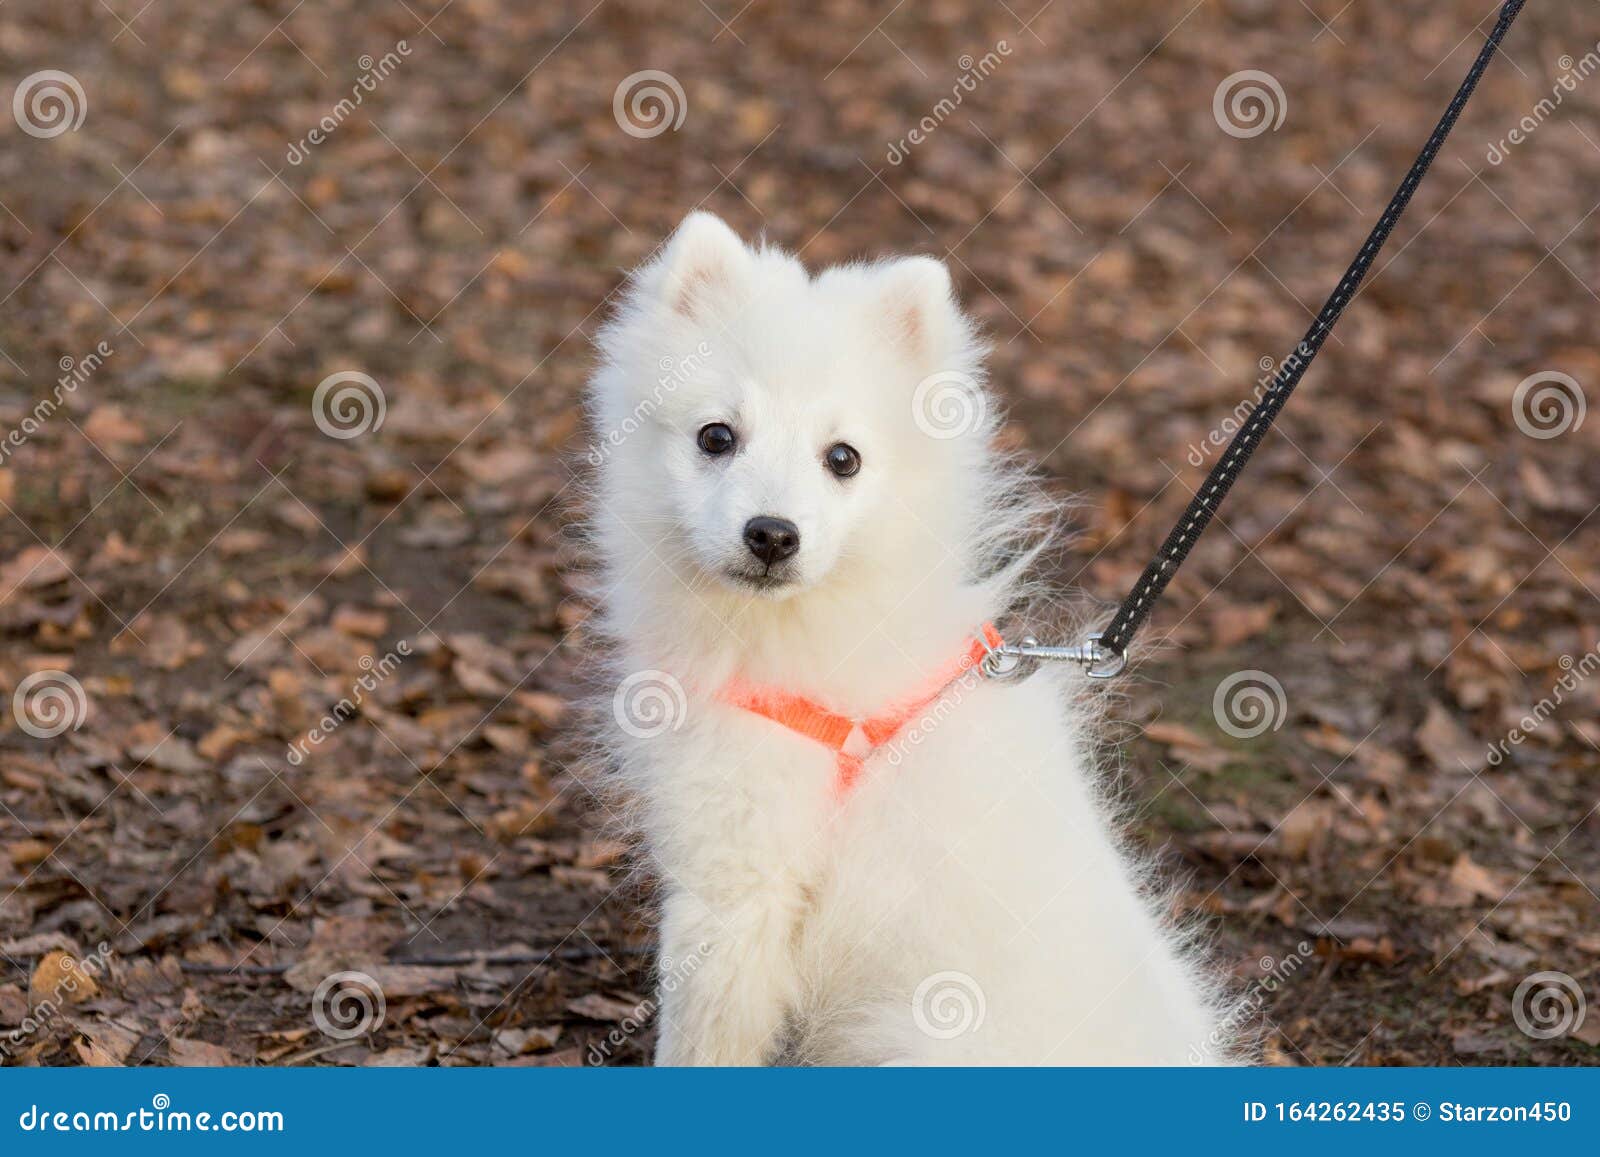 Cute Japanese Spitz Puppy Is Looking At The Camera Pet Animals Stock Image Image Of Japanese Jaws